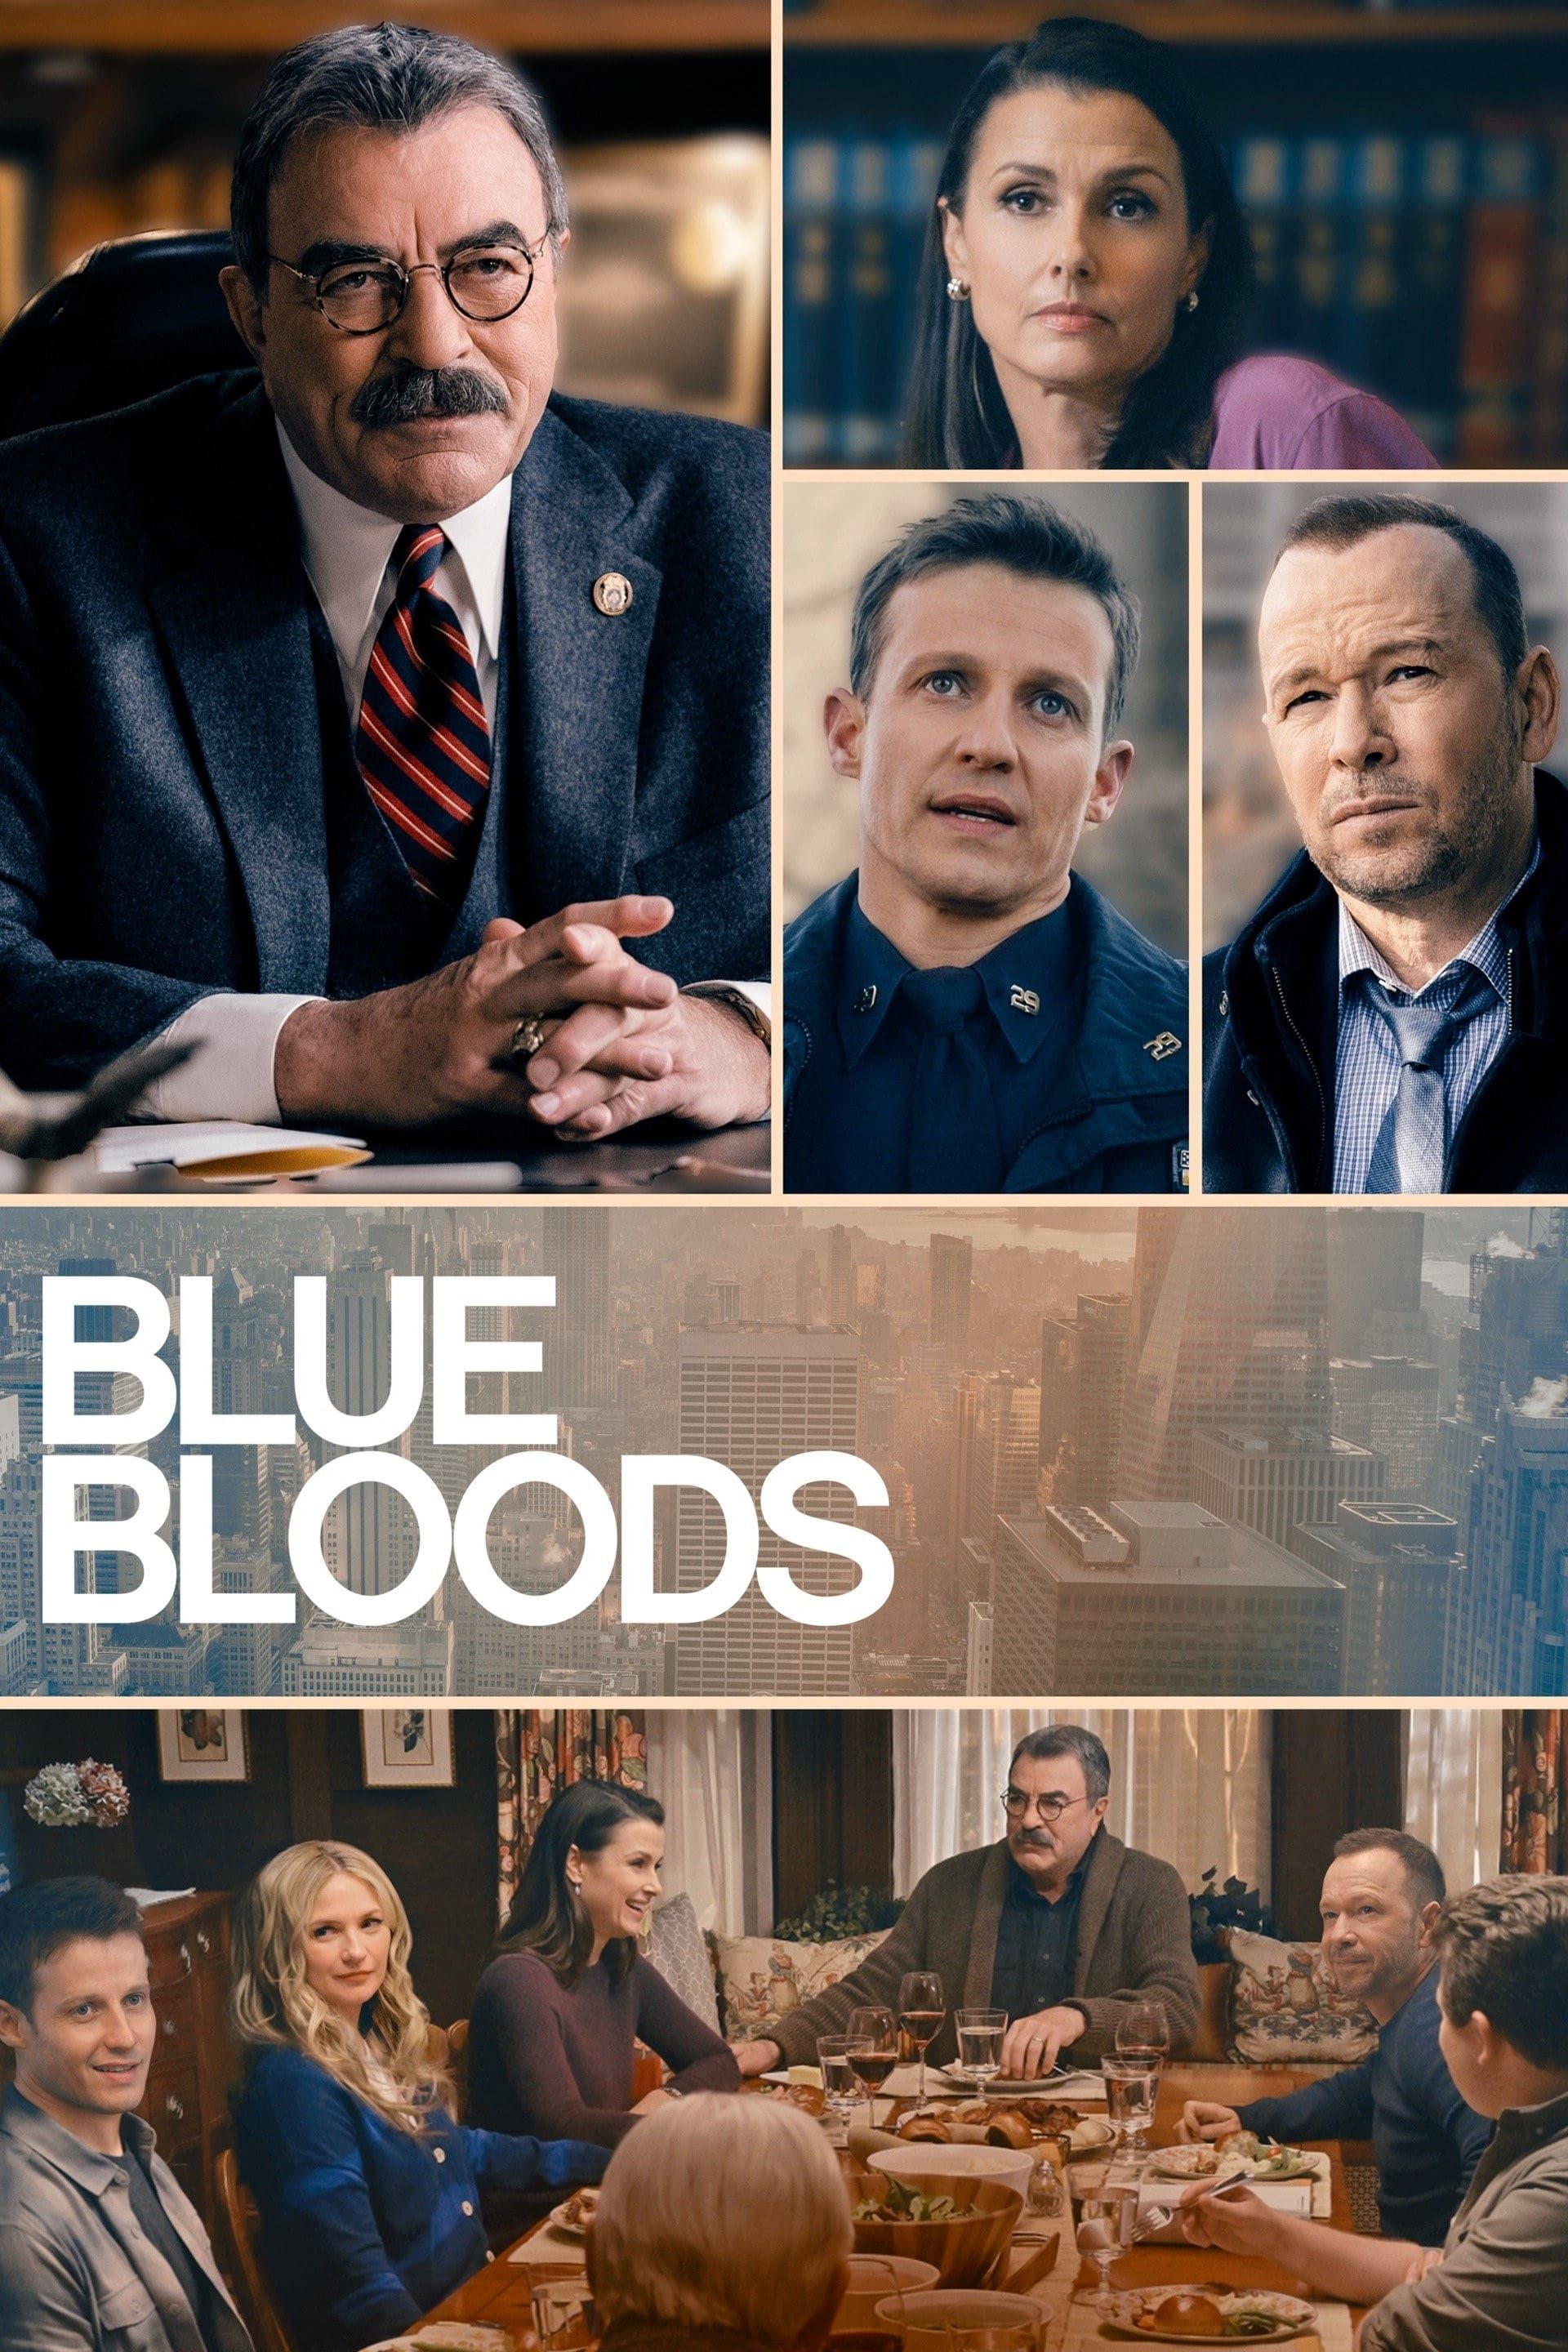 A poster for Blue Bloods featuring the series cast including Tom Selleck as Frank Reagan, Bridget Moynahan as Erin Reagan, Donnie Wahlberg as Danny Reagan, and Will Estes as Jamie Raegan.